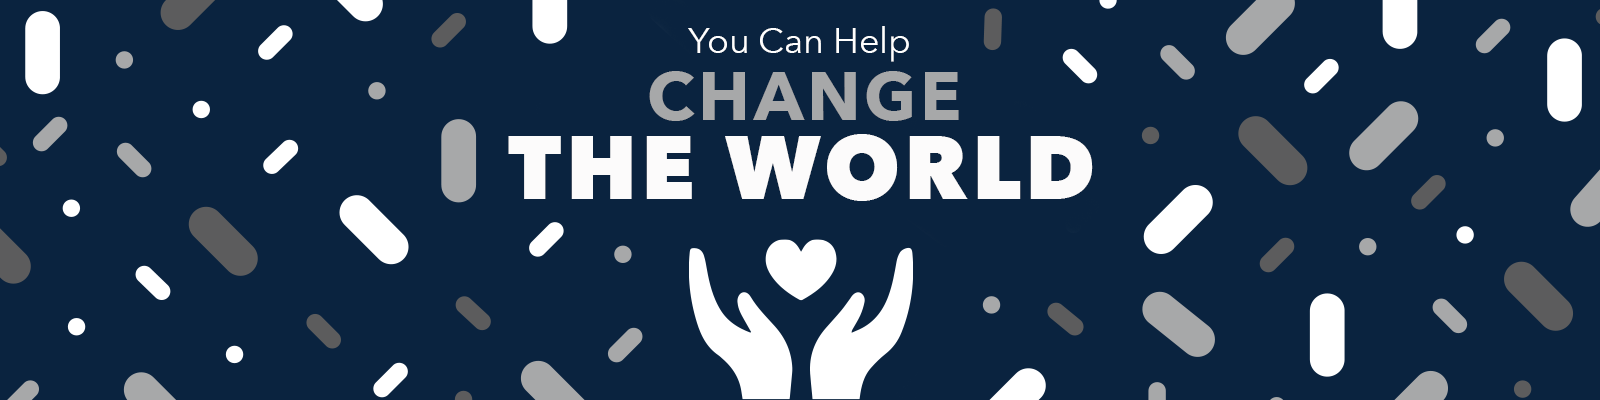 You can help change the world hands with heart in between and confetti